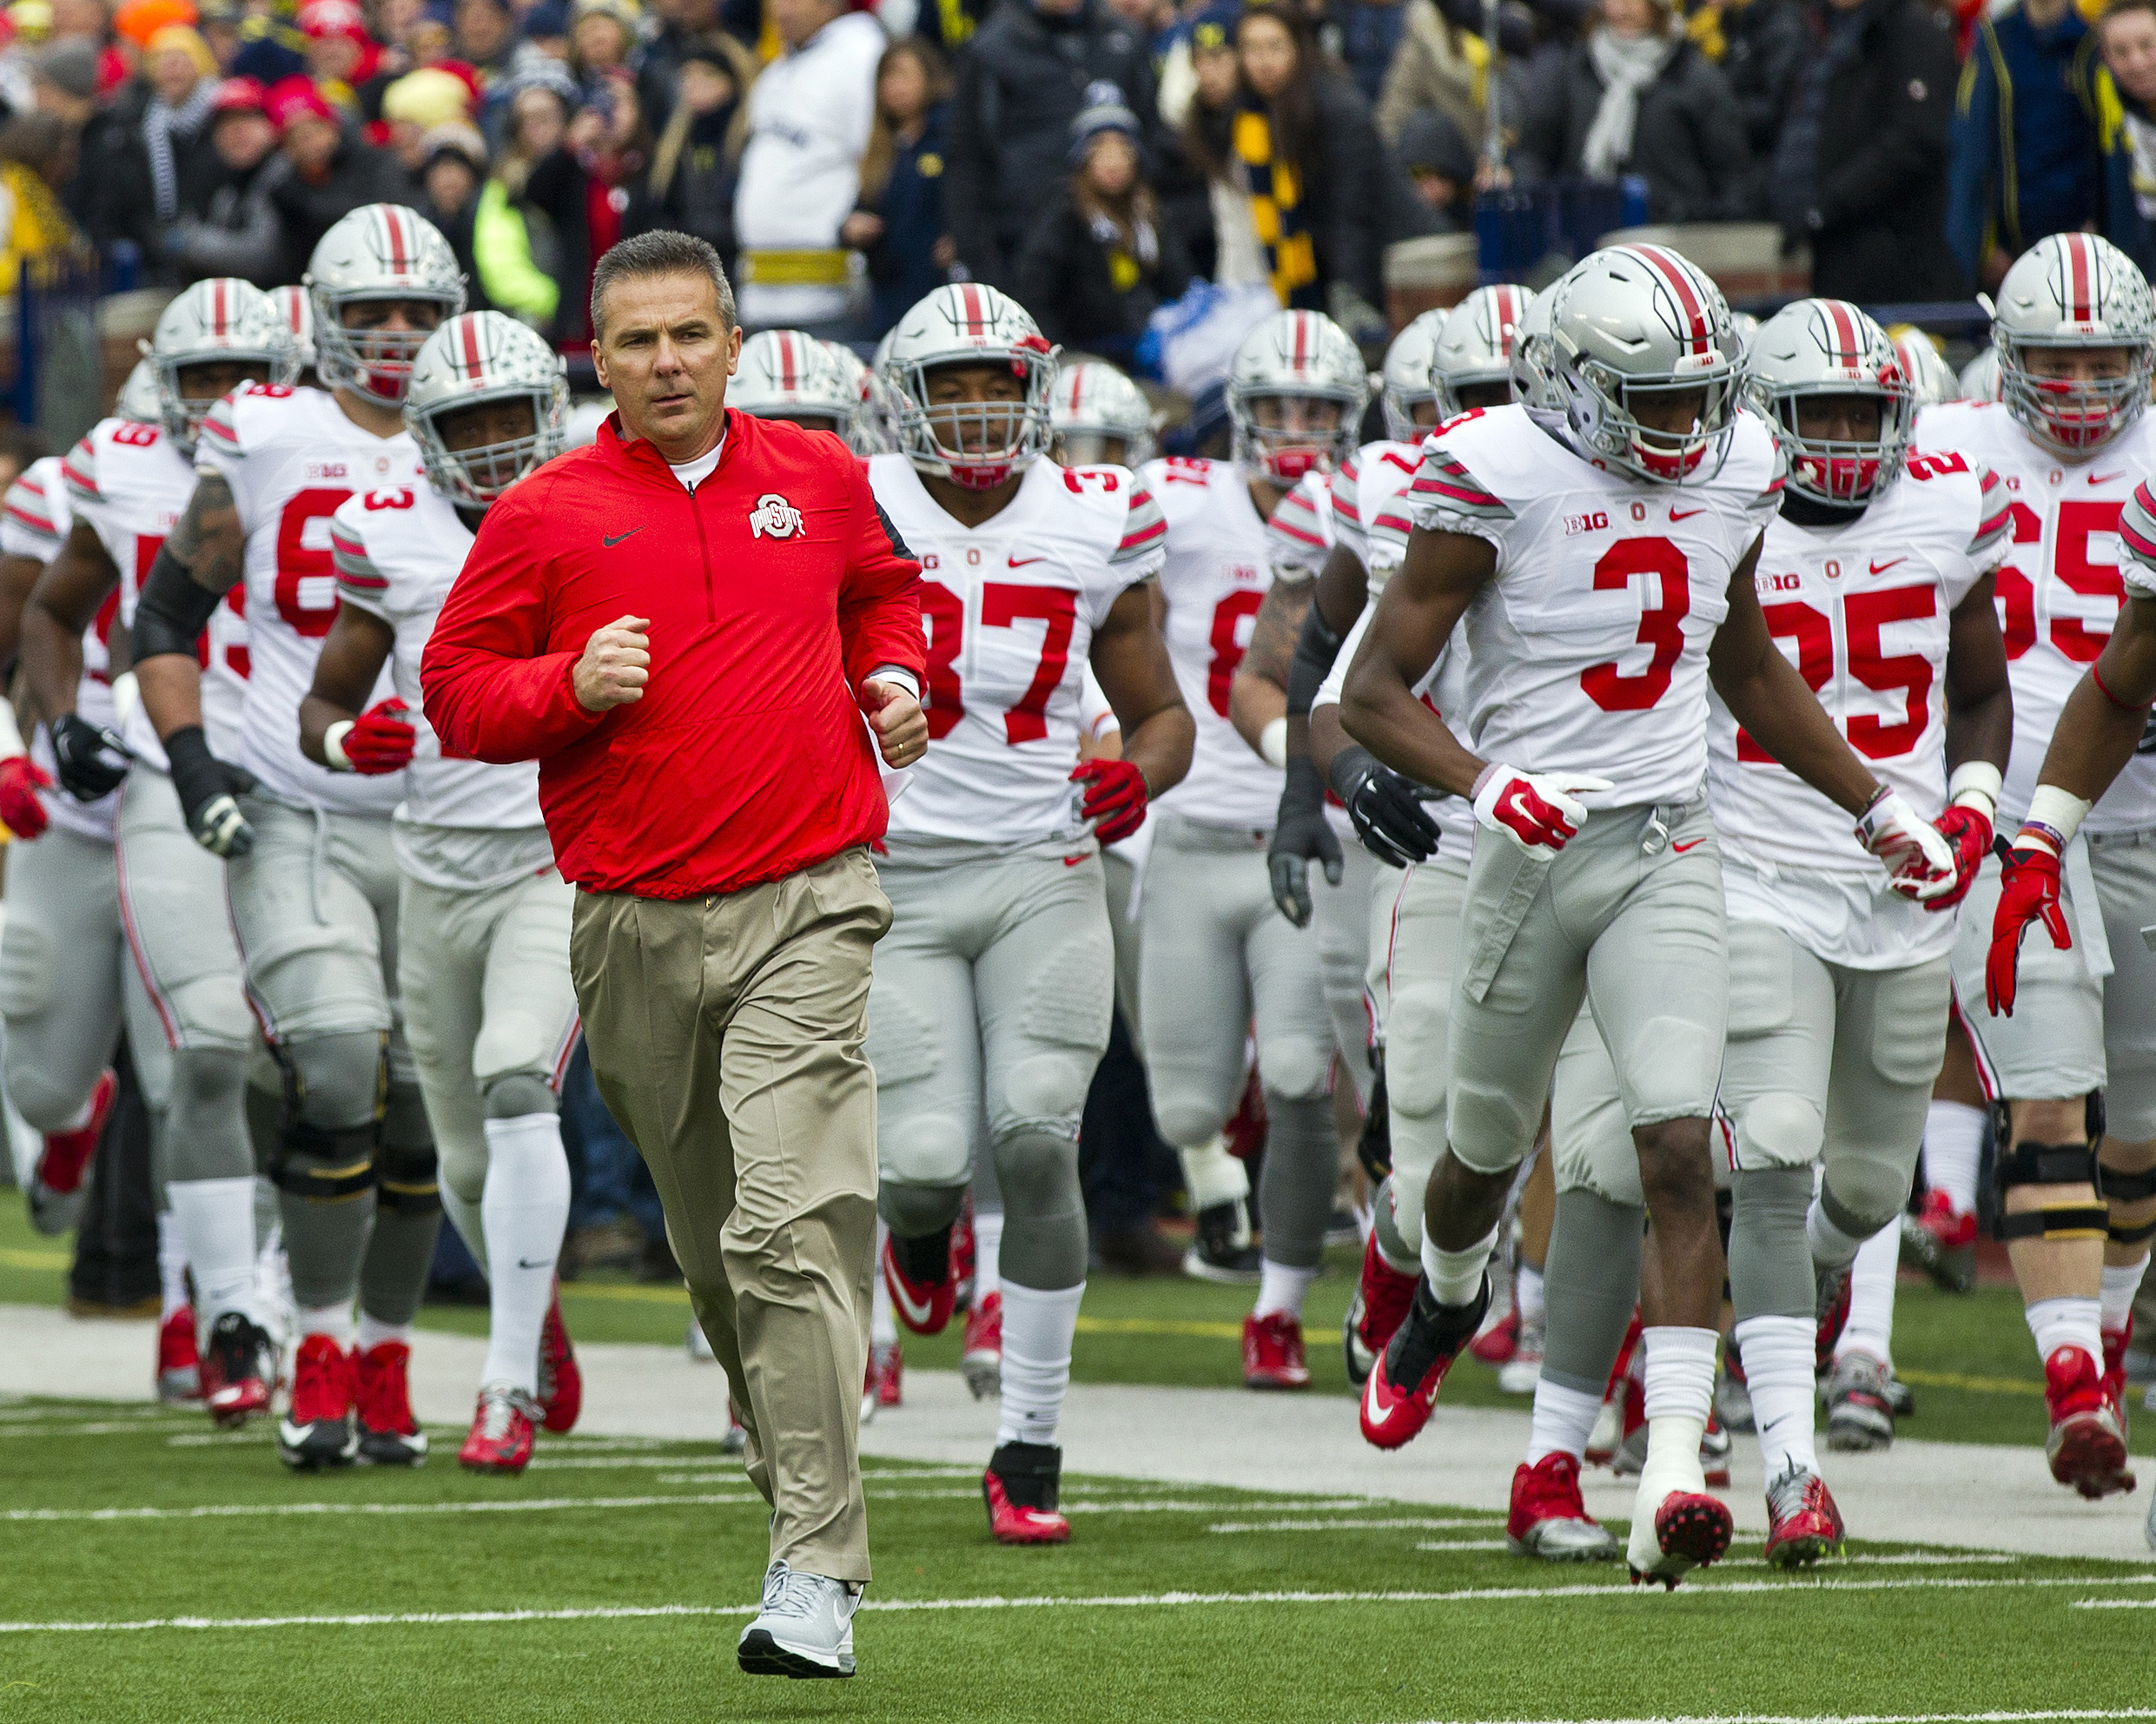 Last year's top-ranked team in the AP Top 25 preseason poll was Ohio State University, whose head coach, Urban Meyer, is seen here leading his team onto the field before playing the University of Michigan in Ann Arbor, Michigan, Nov. 28, 2015. (AP Photo/Tony Ding)